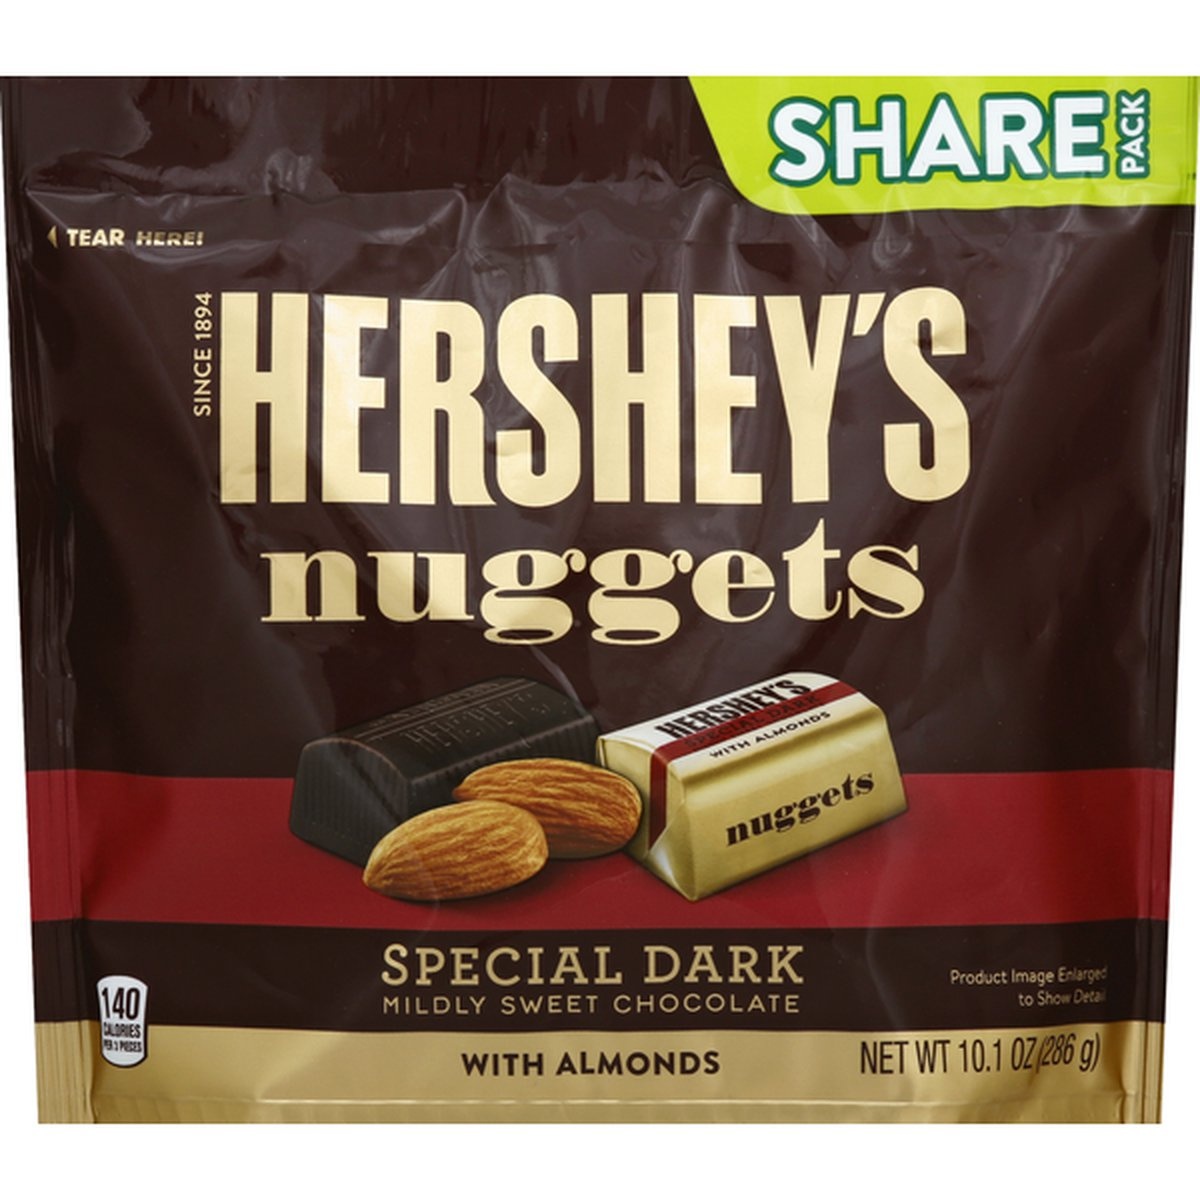 slide 1 of 1, Hershey's Chocolate, With Almonds, Mildly Sweet, Special Dark, Share Pack, 10.1 oz